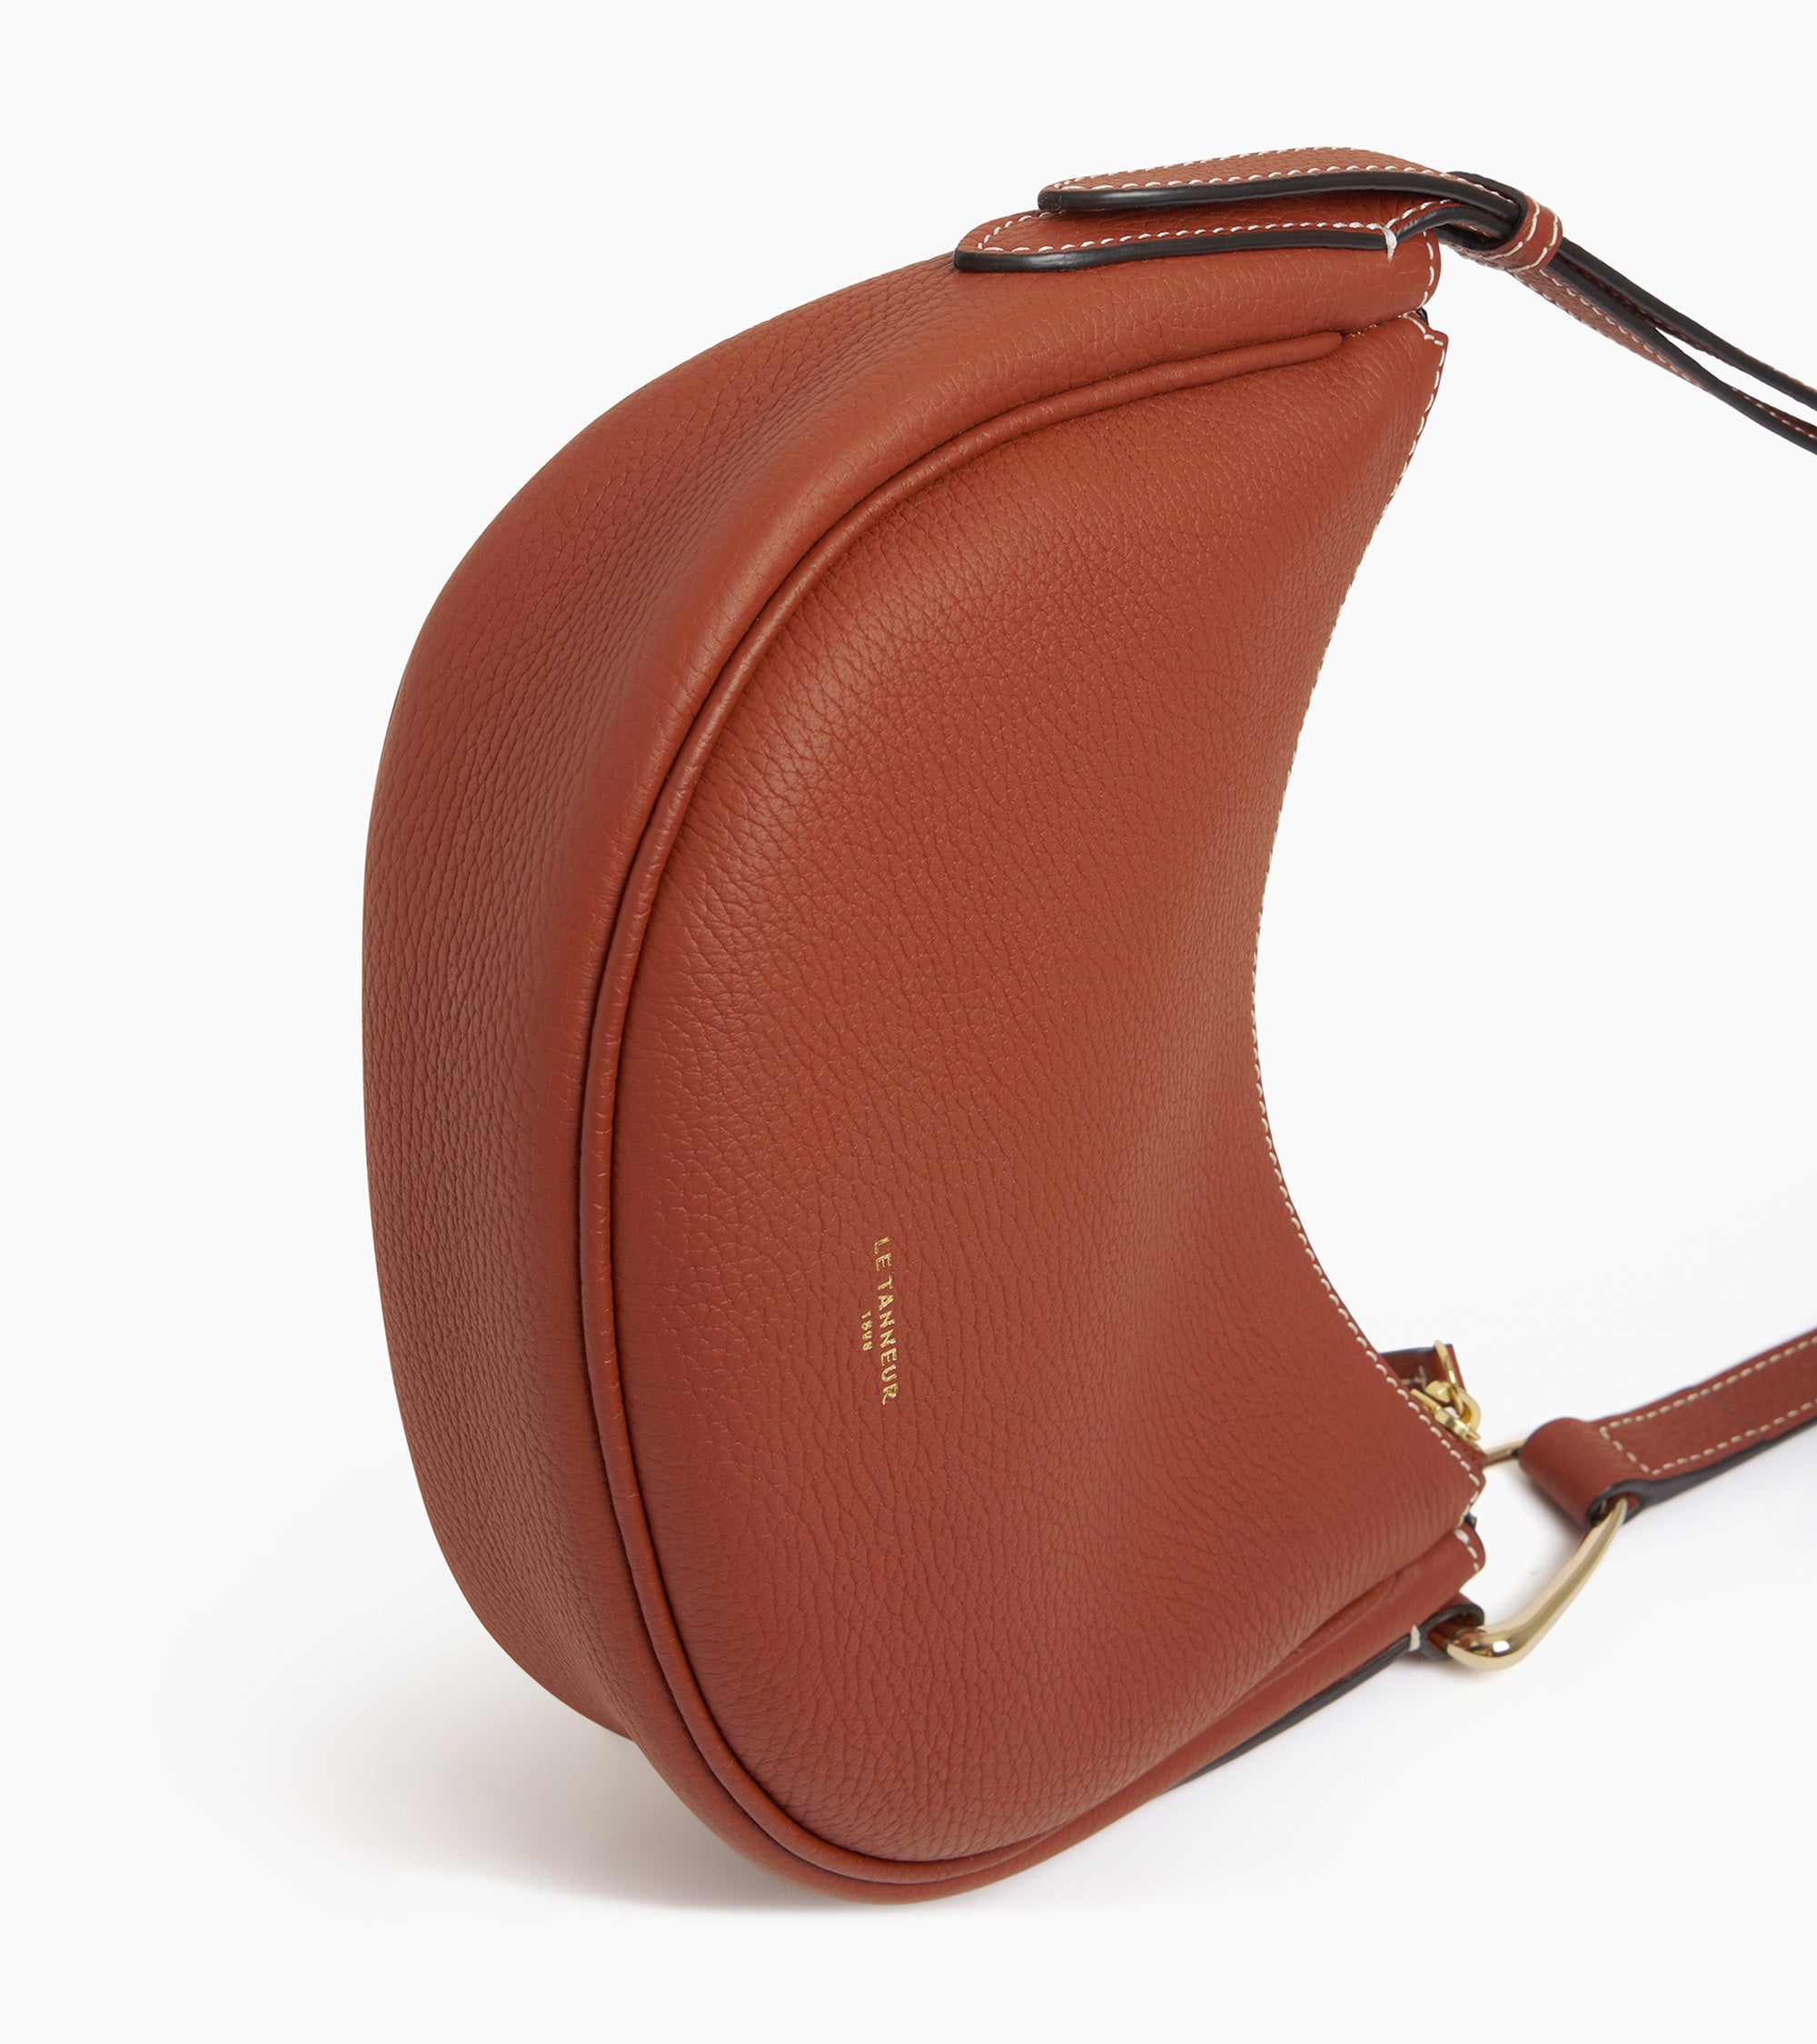 Madeleine small shoulder bag in grained leather